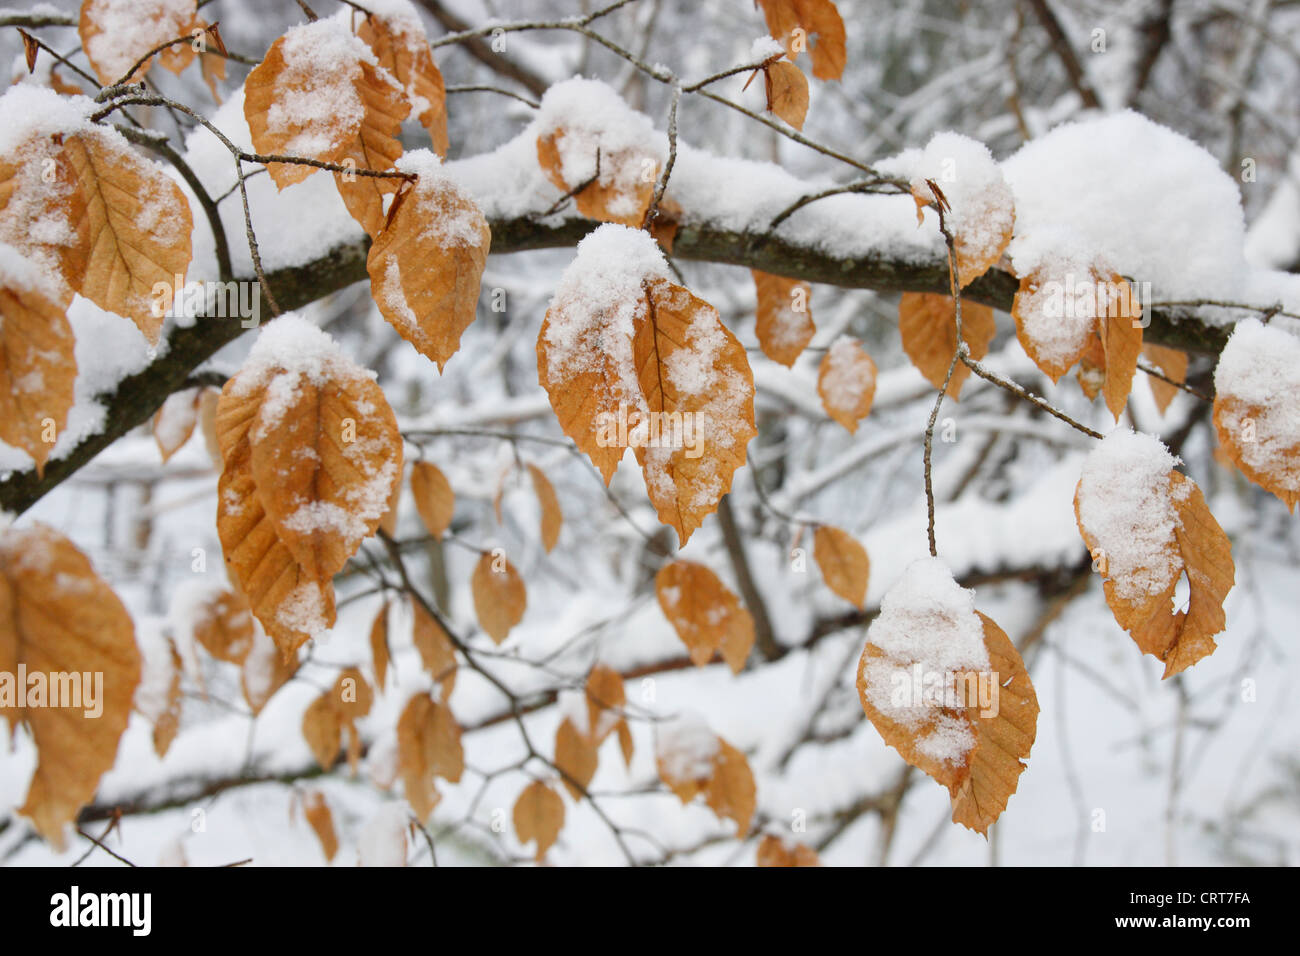 Snow on branches and autumn leaves in the forest in winter, Highlands, Scotland, UK Stock Photo